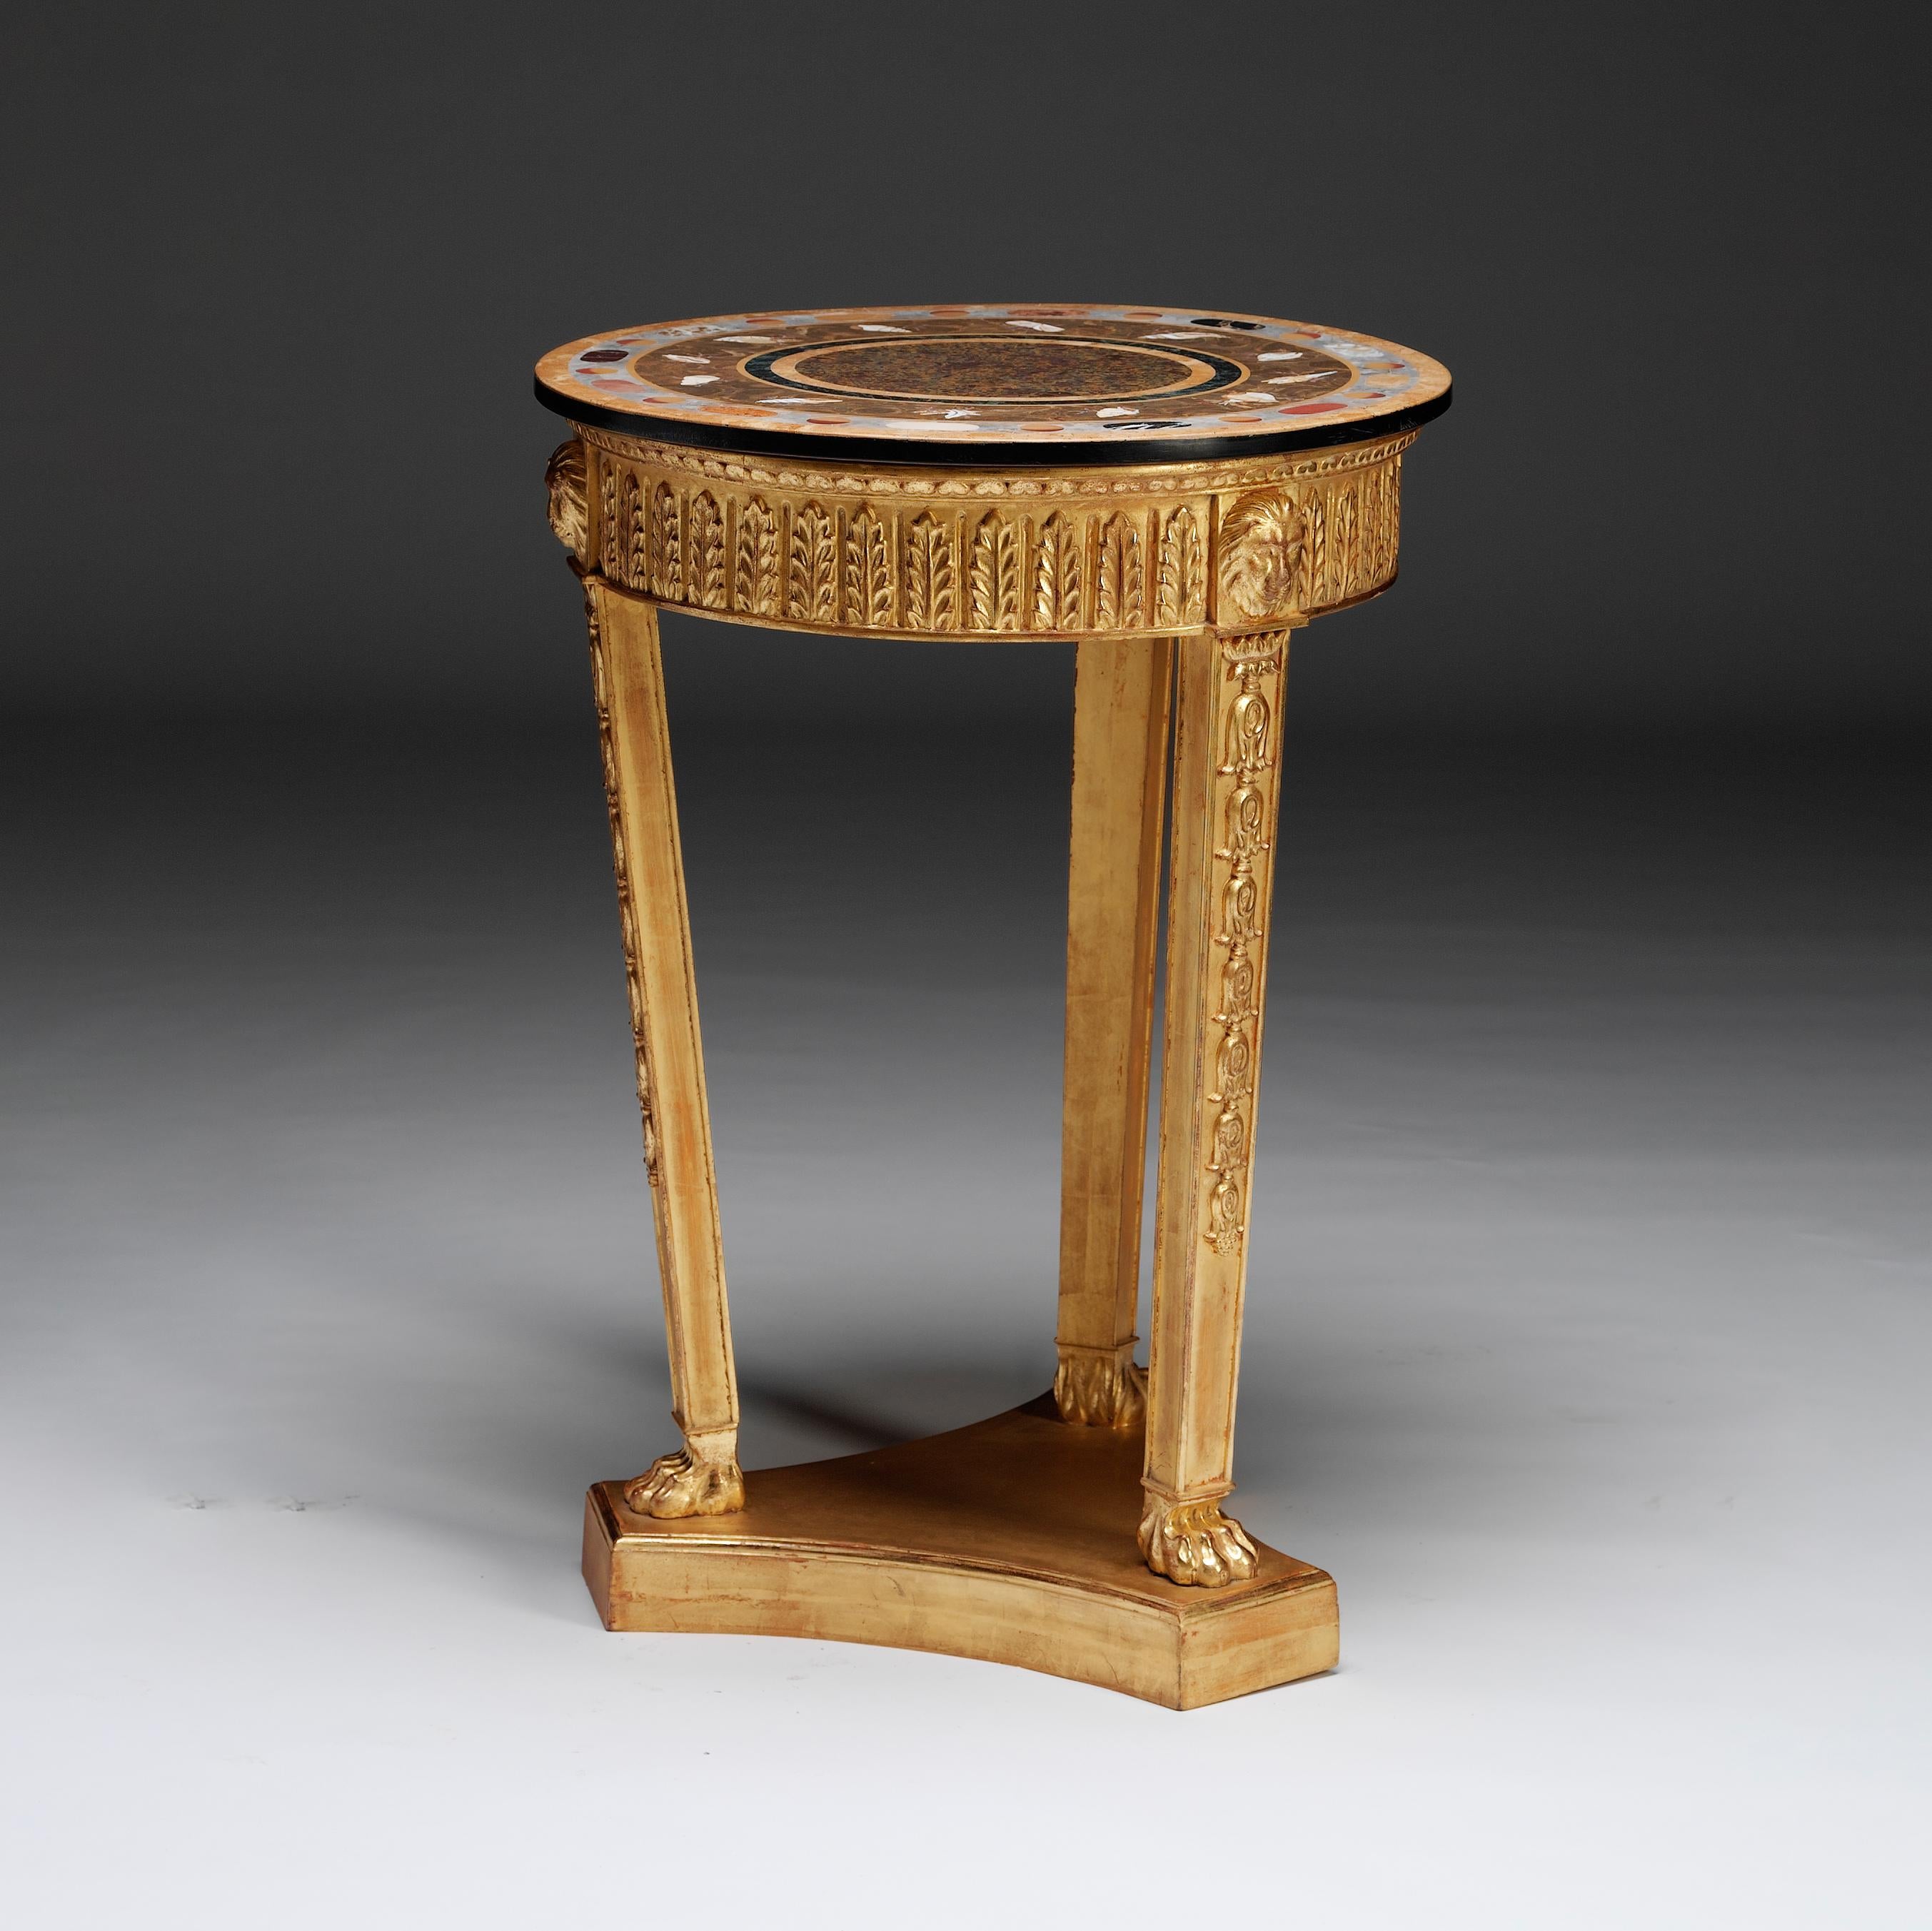 A carved gilt-wood ‘torchere’ in the Regency style. The exotic, circular marble top of concentric circles is inlaid with double bands of geometric shapes and seashells. The palm leaf decorated apron, punctuated by carved lion masks, is raised on